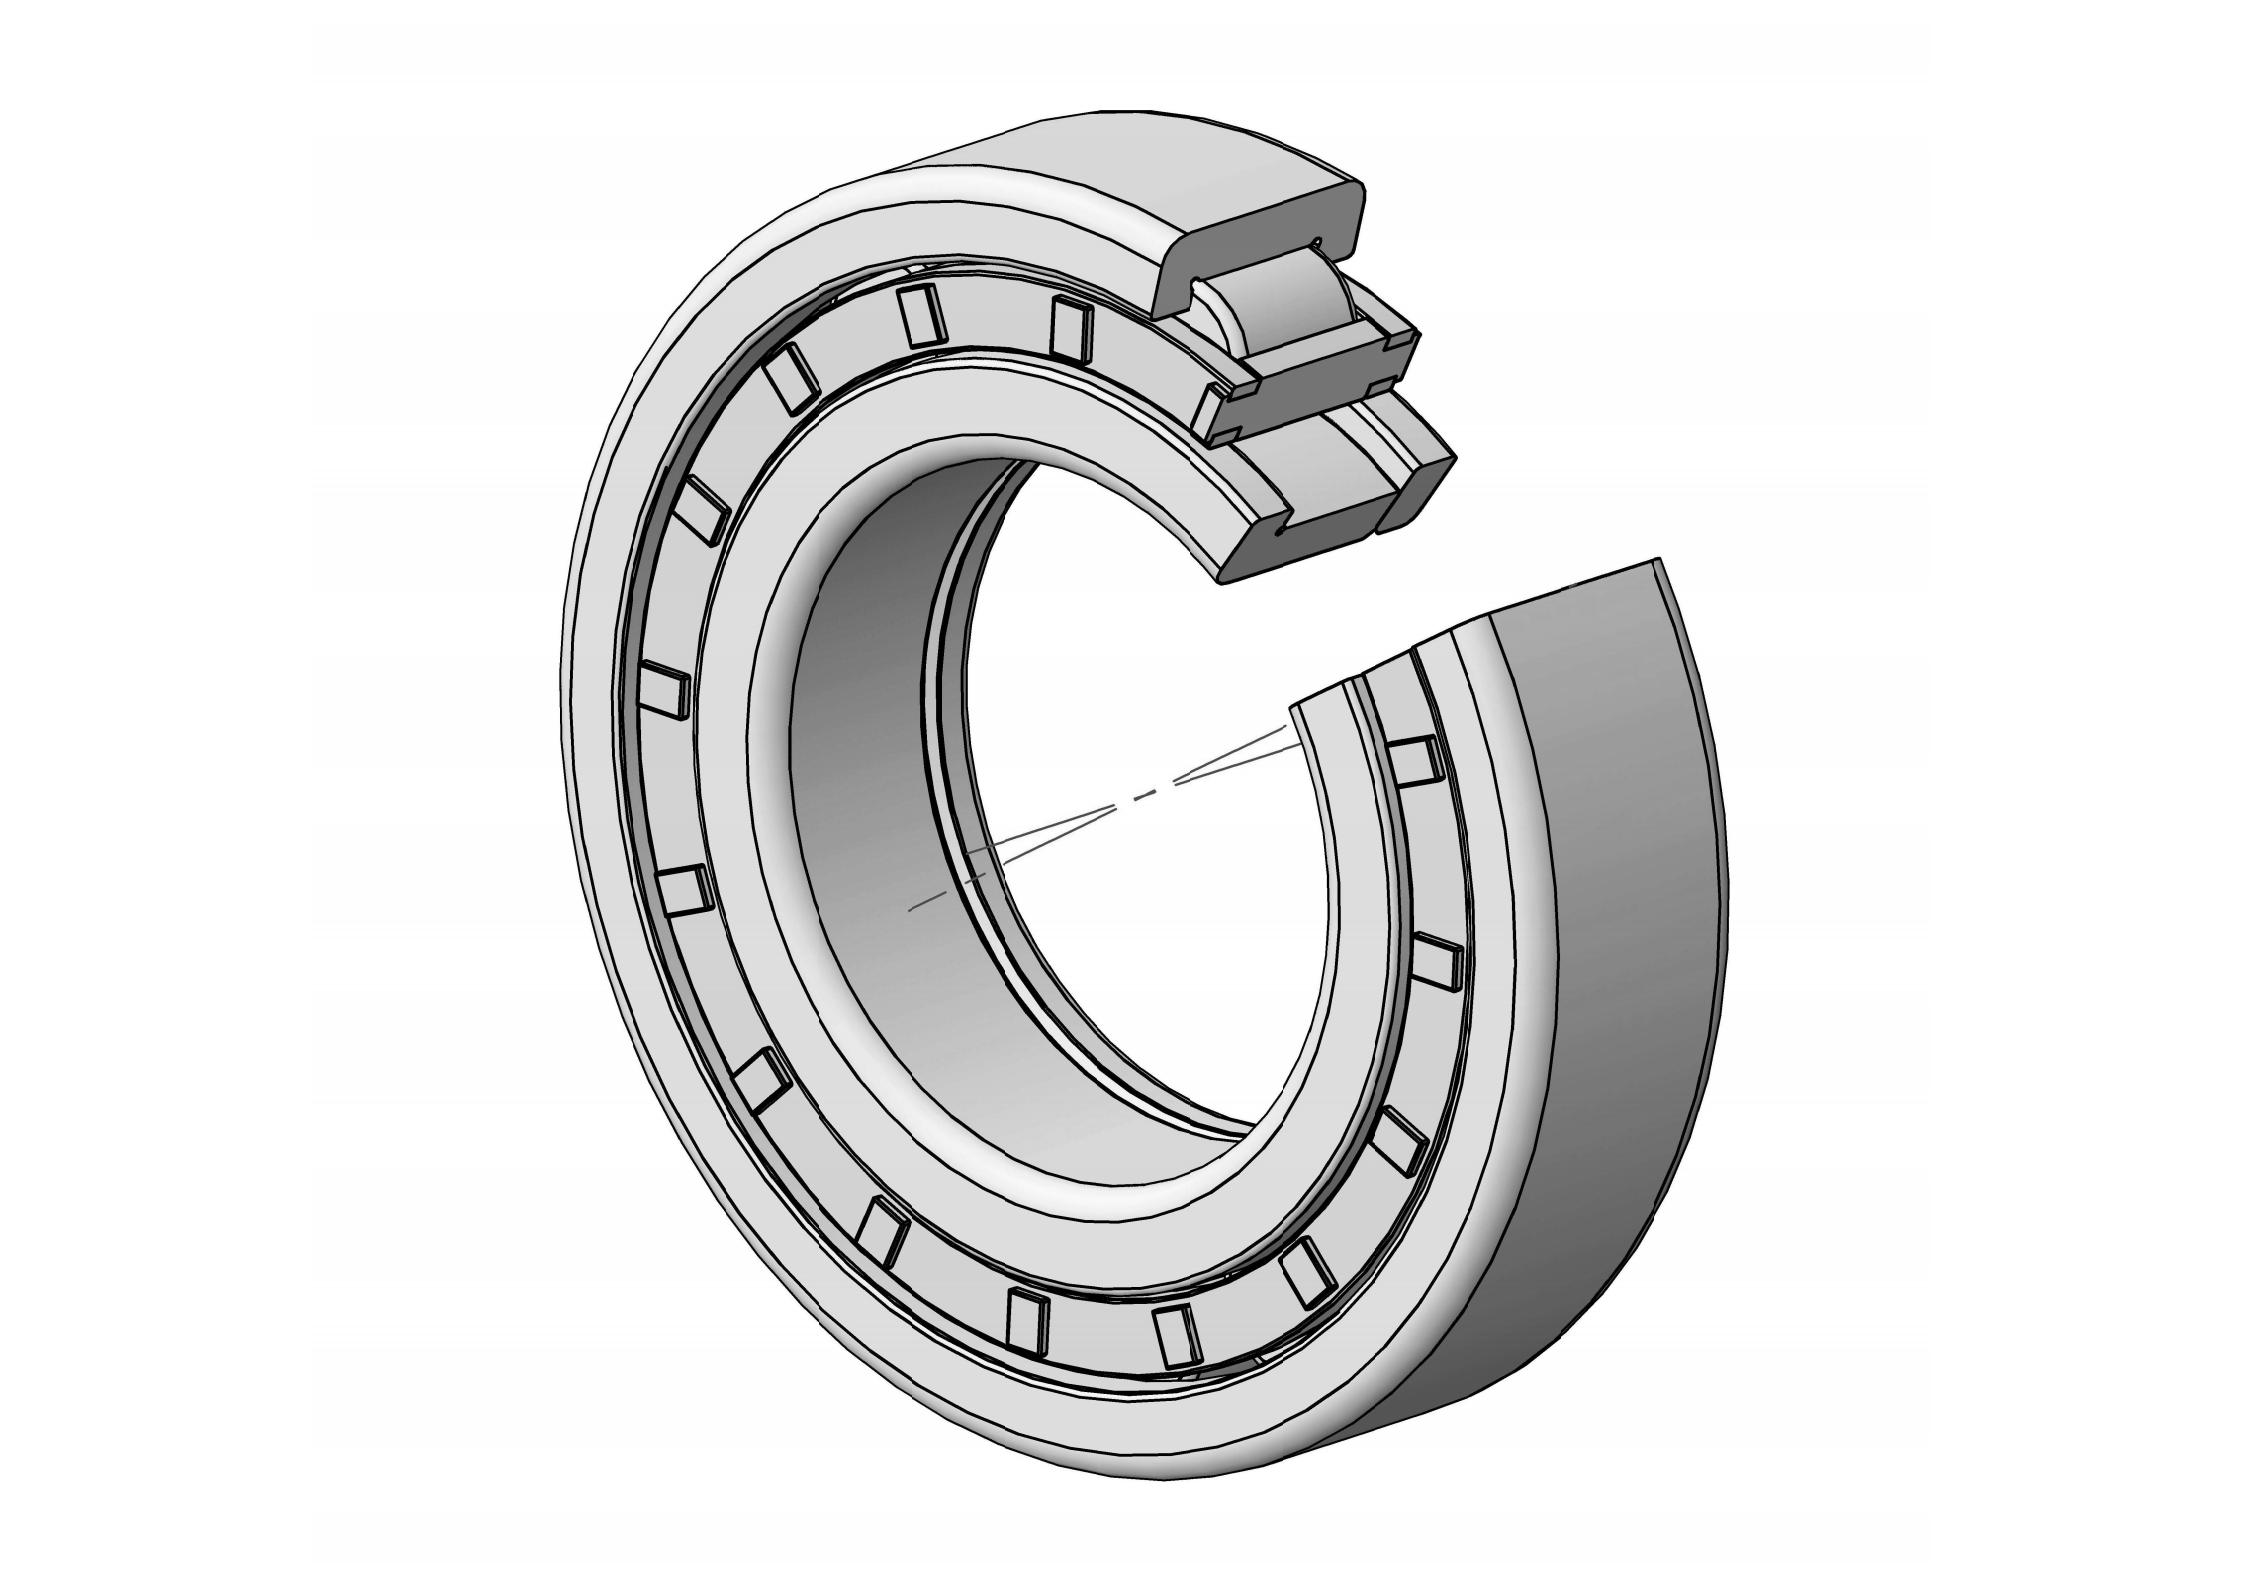 NUP218-E Single Row Cylindrical roller bearing 